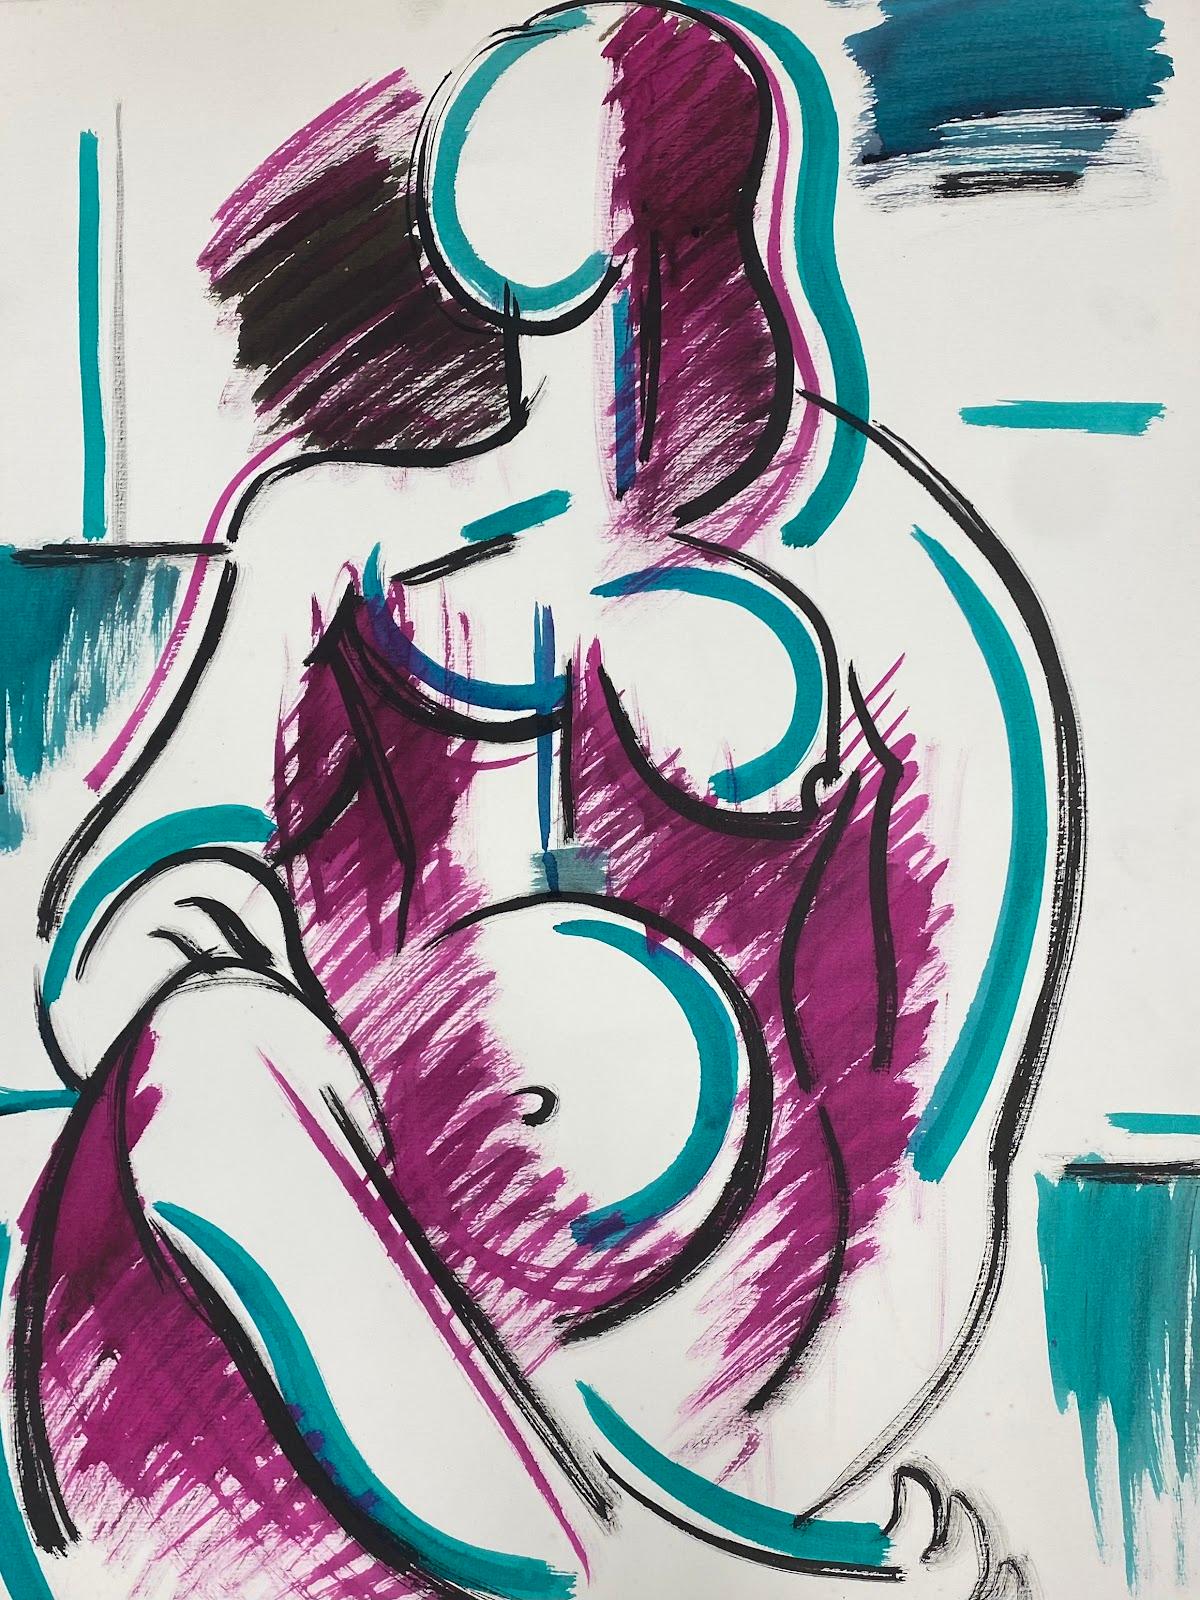 Paul-Louis Bolot (French 1918-2003) Figurative Painting - 20th Century French Modernist Painting Purple Pink & Teal Green Abstract Nude 